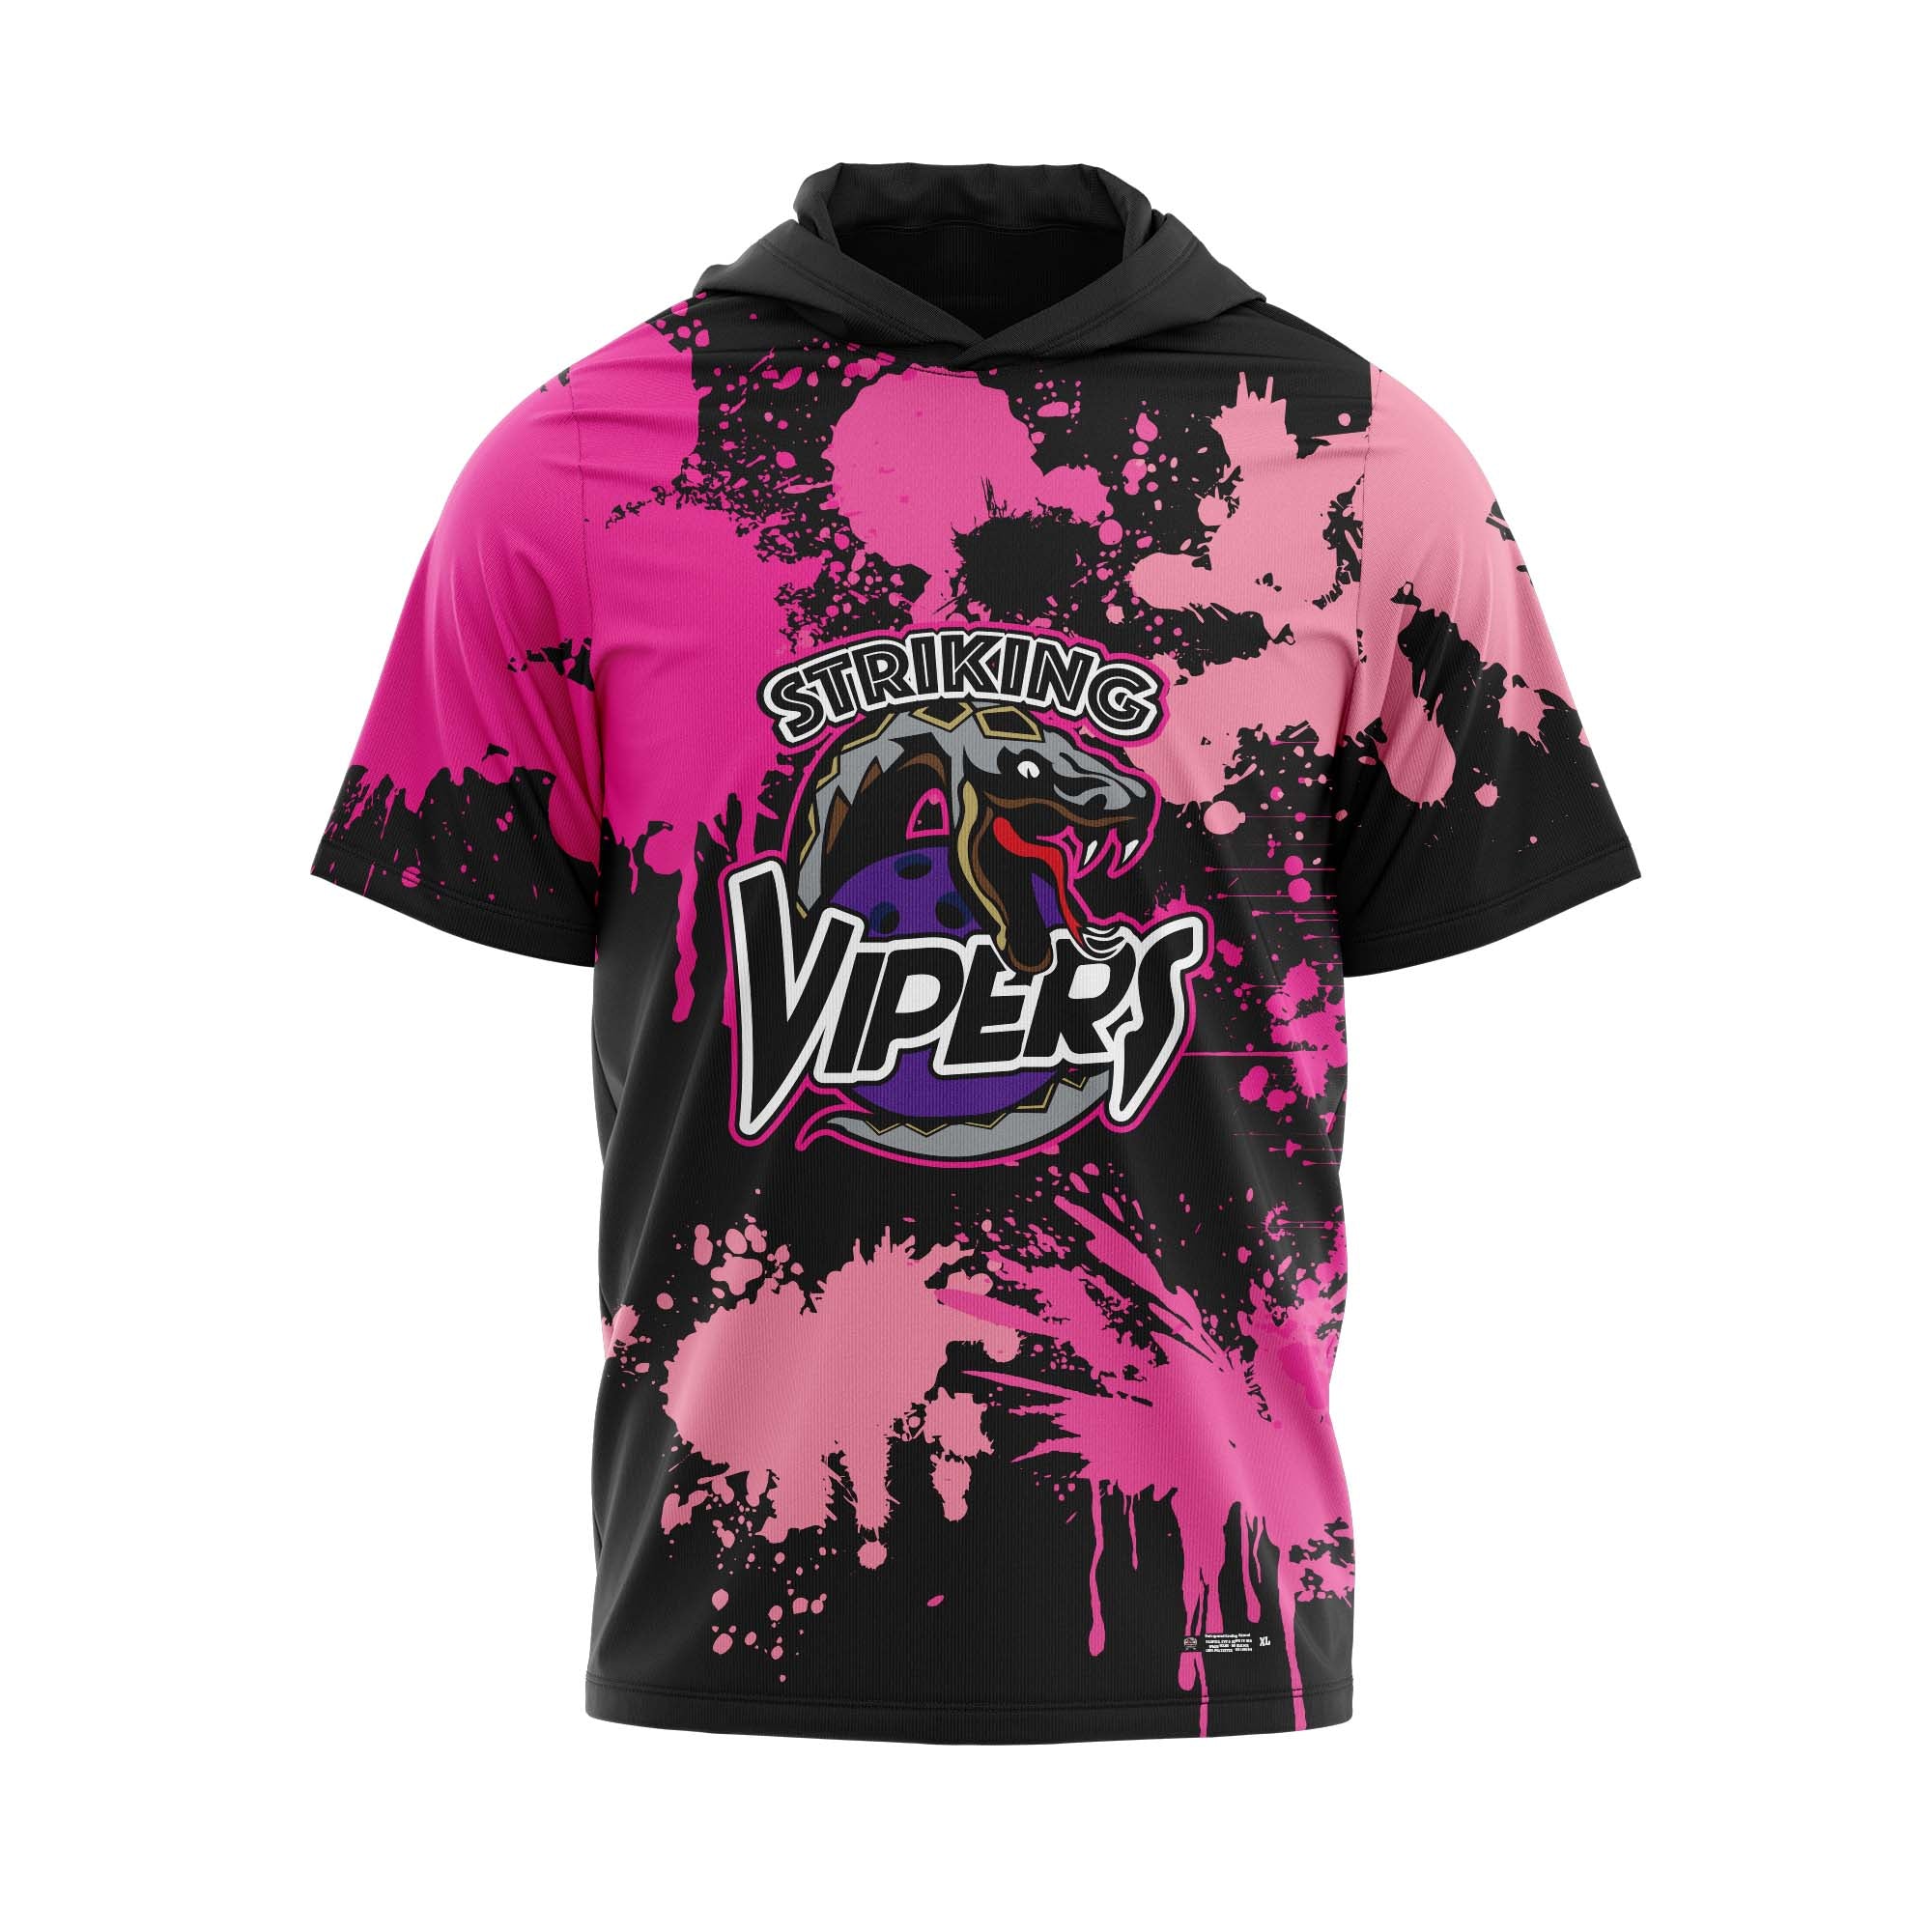 Striking Vipers Breast Cancer Jersey